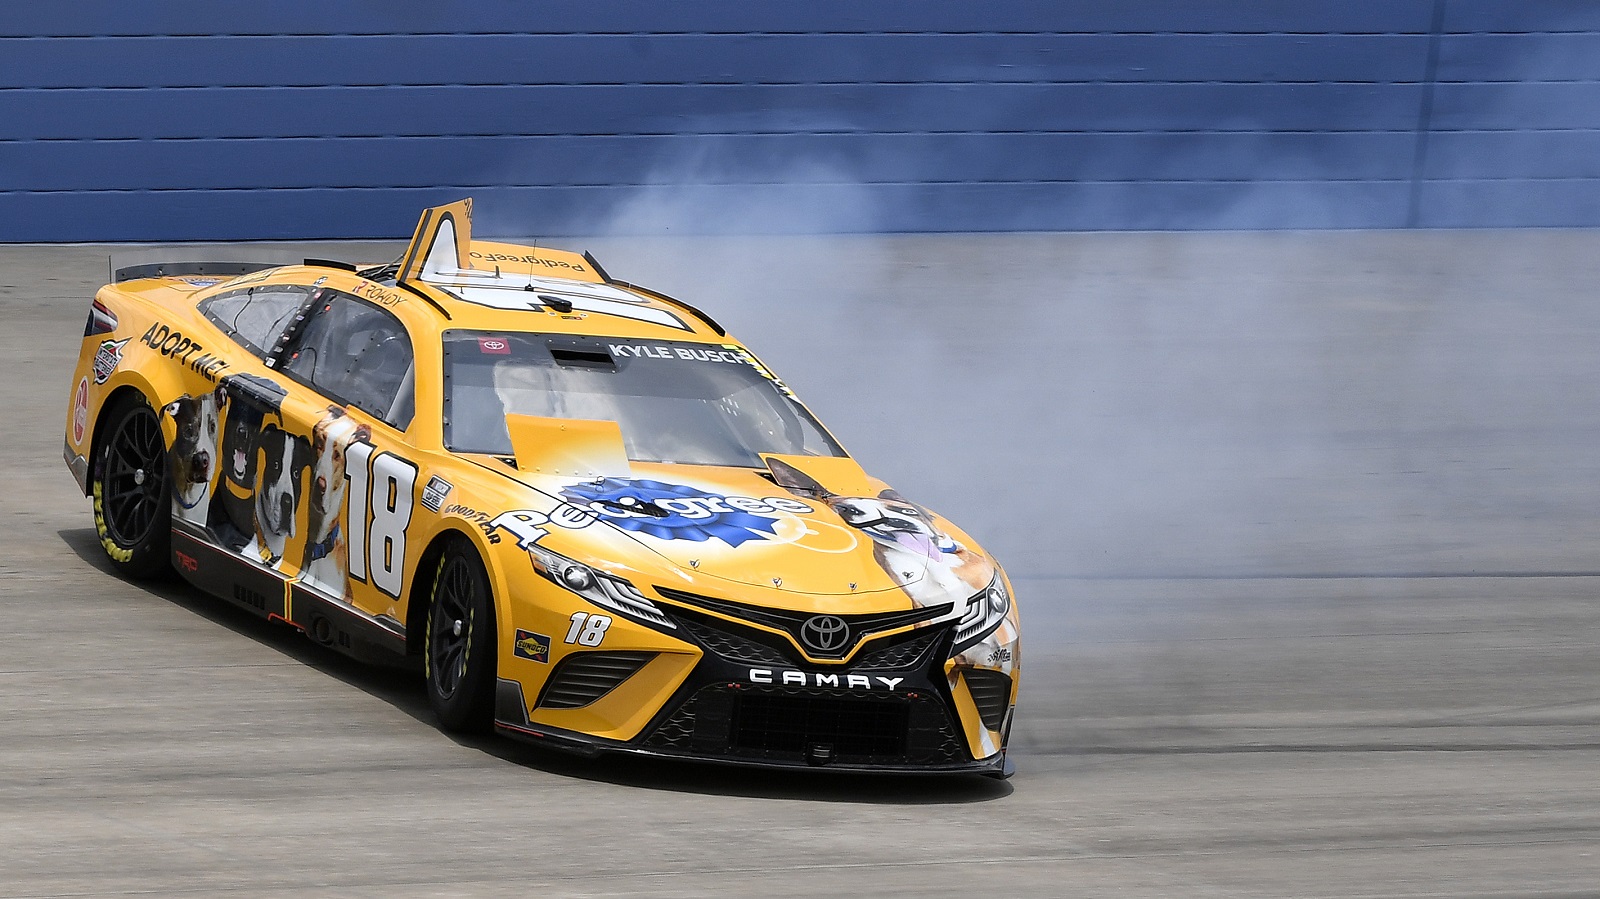 Kyle Busch, driver of the No. 18 Toyota, spins during qualifying for the NASCAR Cup Series Ally 400 at Nashville Superspeedway on June 25, 2022. | Logan Riely/Getty Images